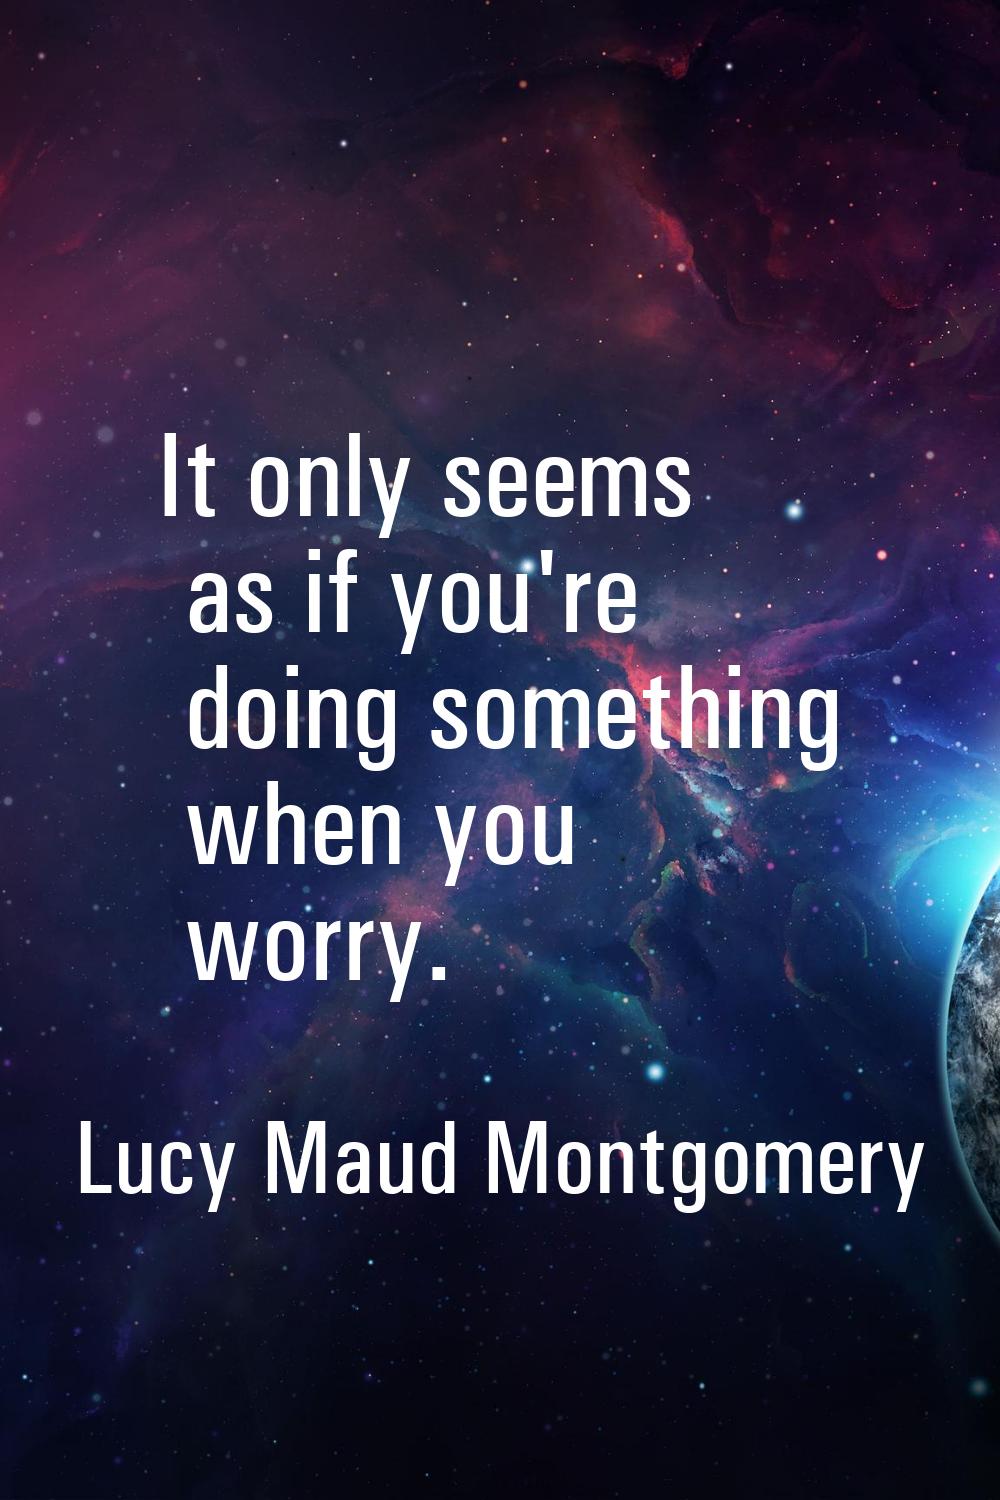 It only seems as if you're doing something when you worry.